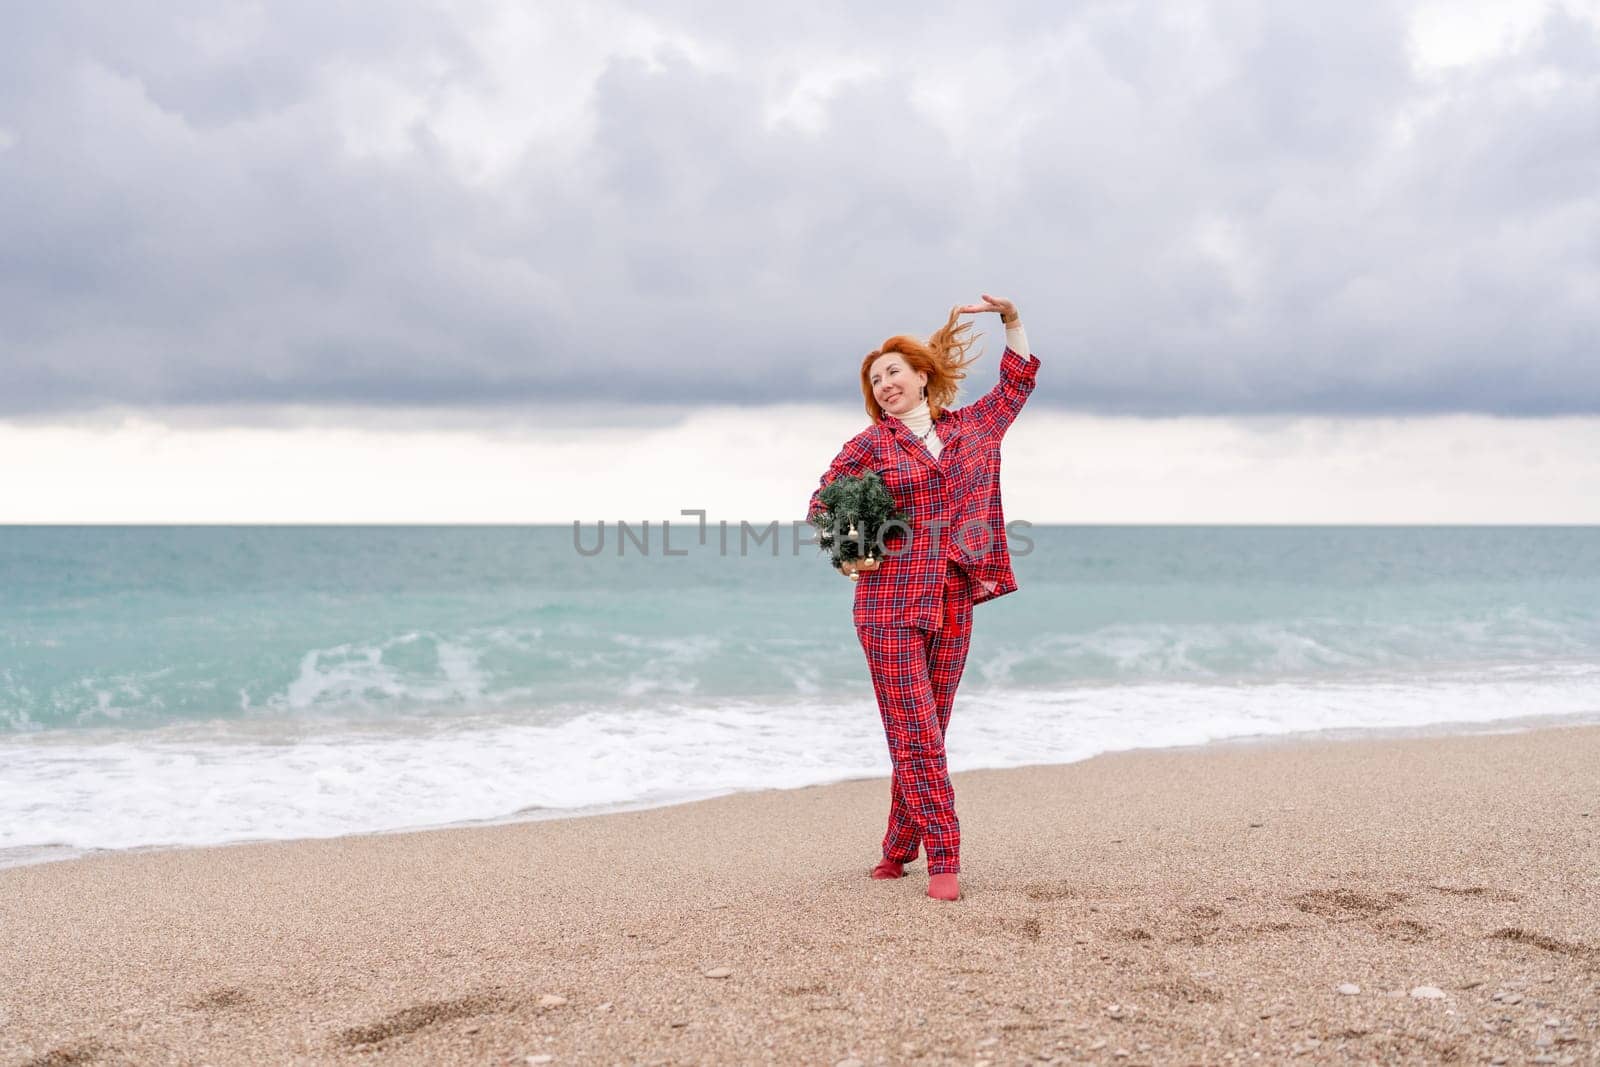 Sea Lady in plaid shirt with a christmas tree in her hands enjoys beach. Coastal area. Christmas, New Year holidays concep.